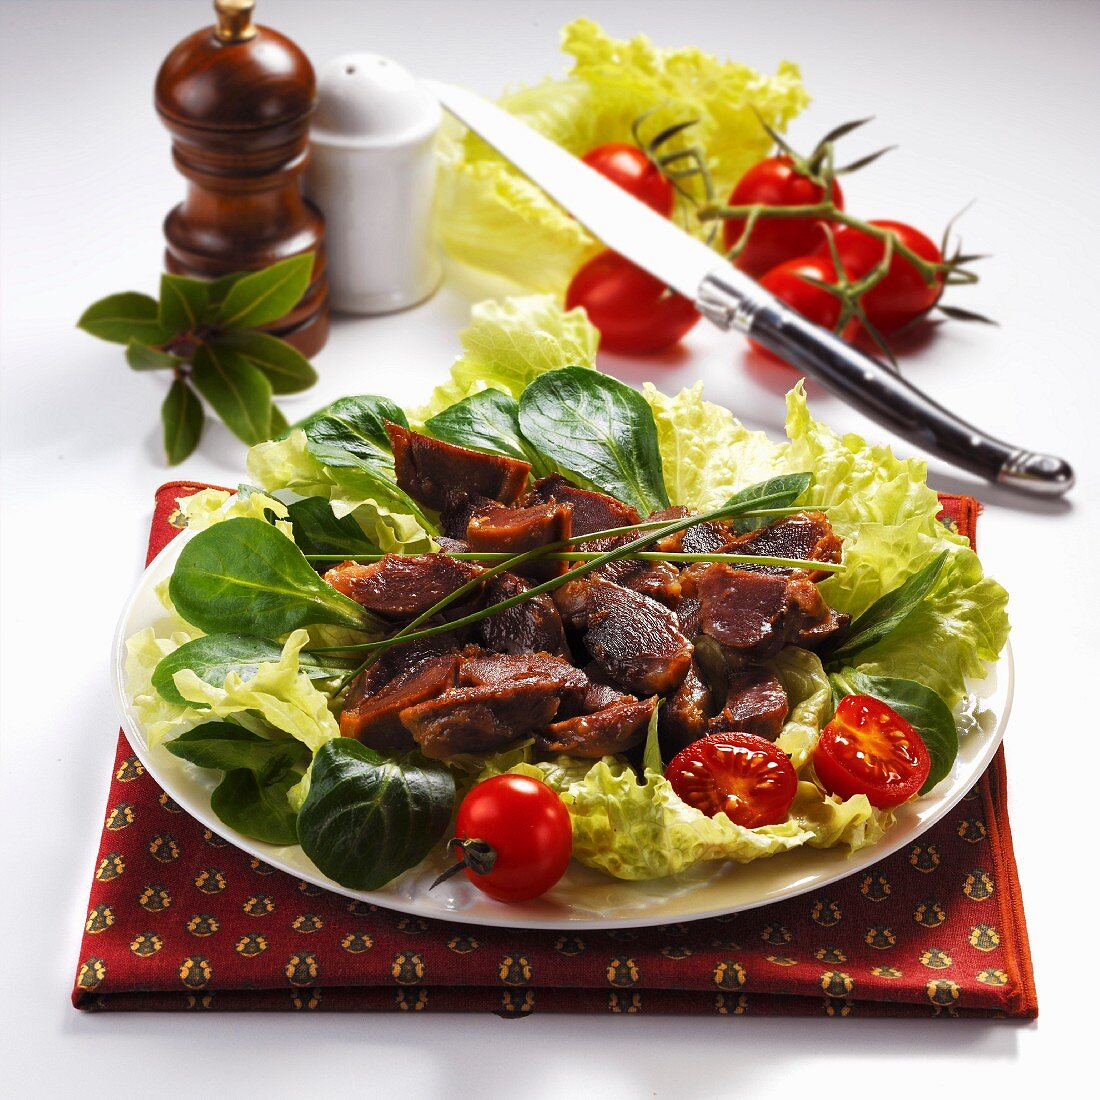 Salad with gizzards